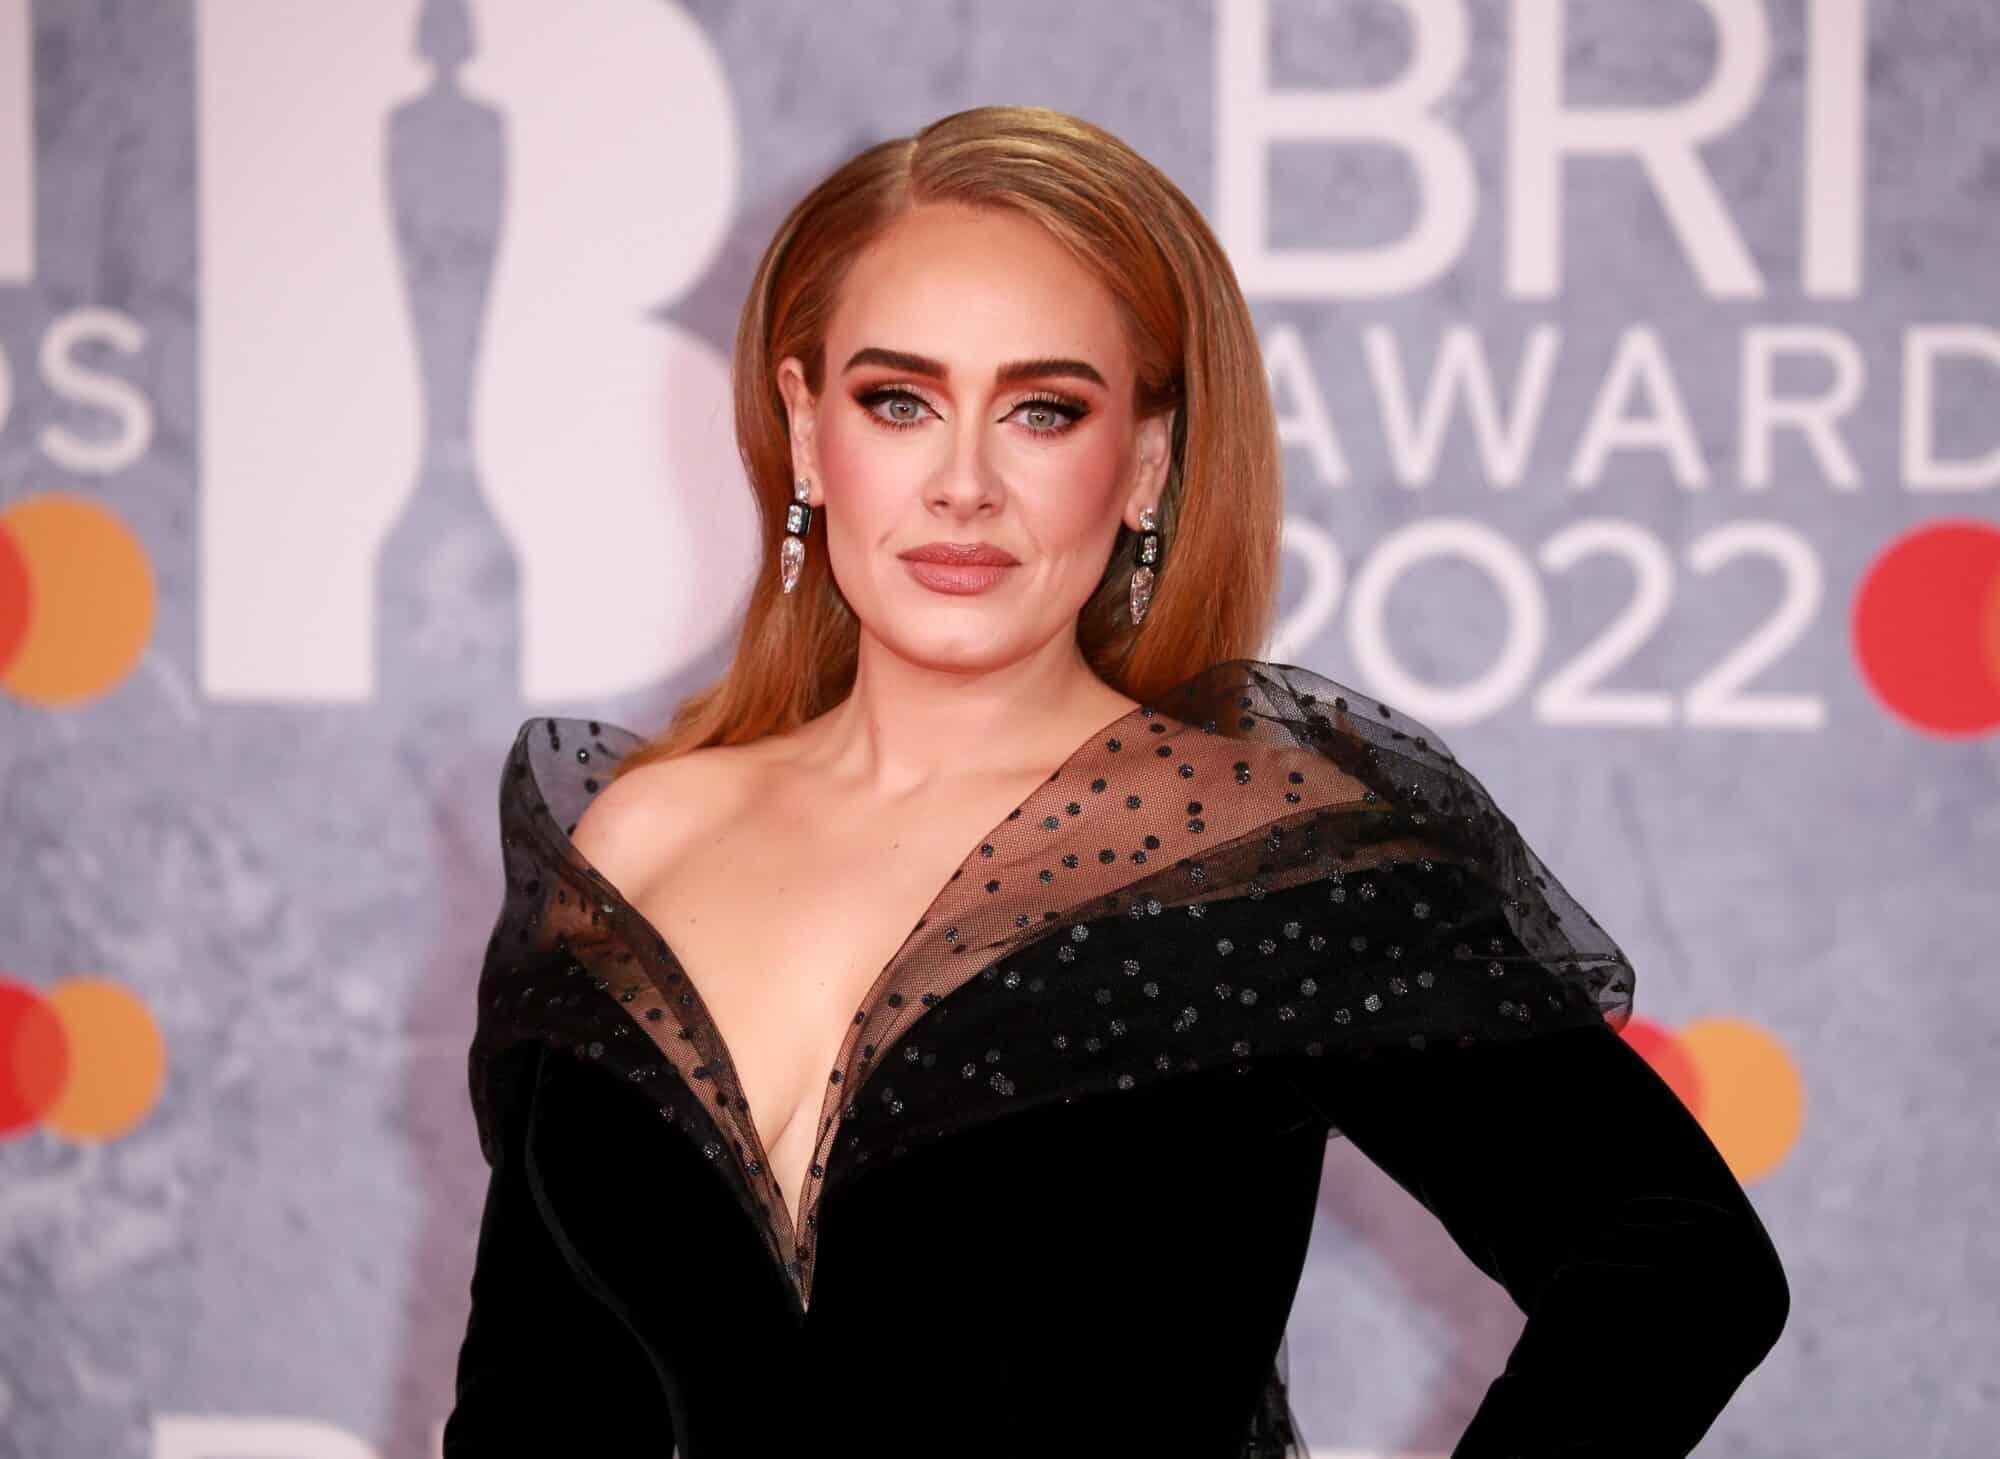 Adele on the red carpet at the BRIT Awards 2022.